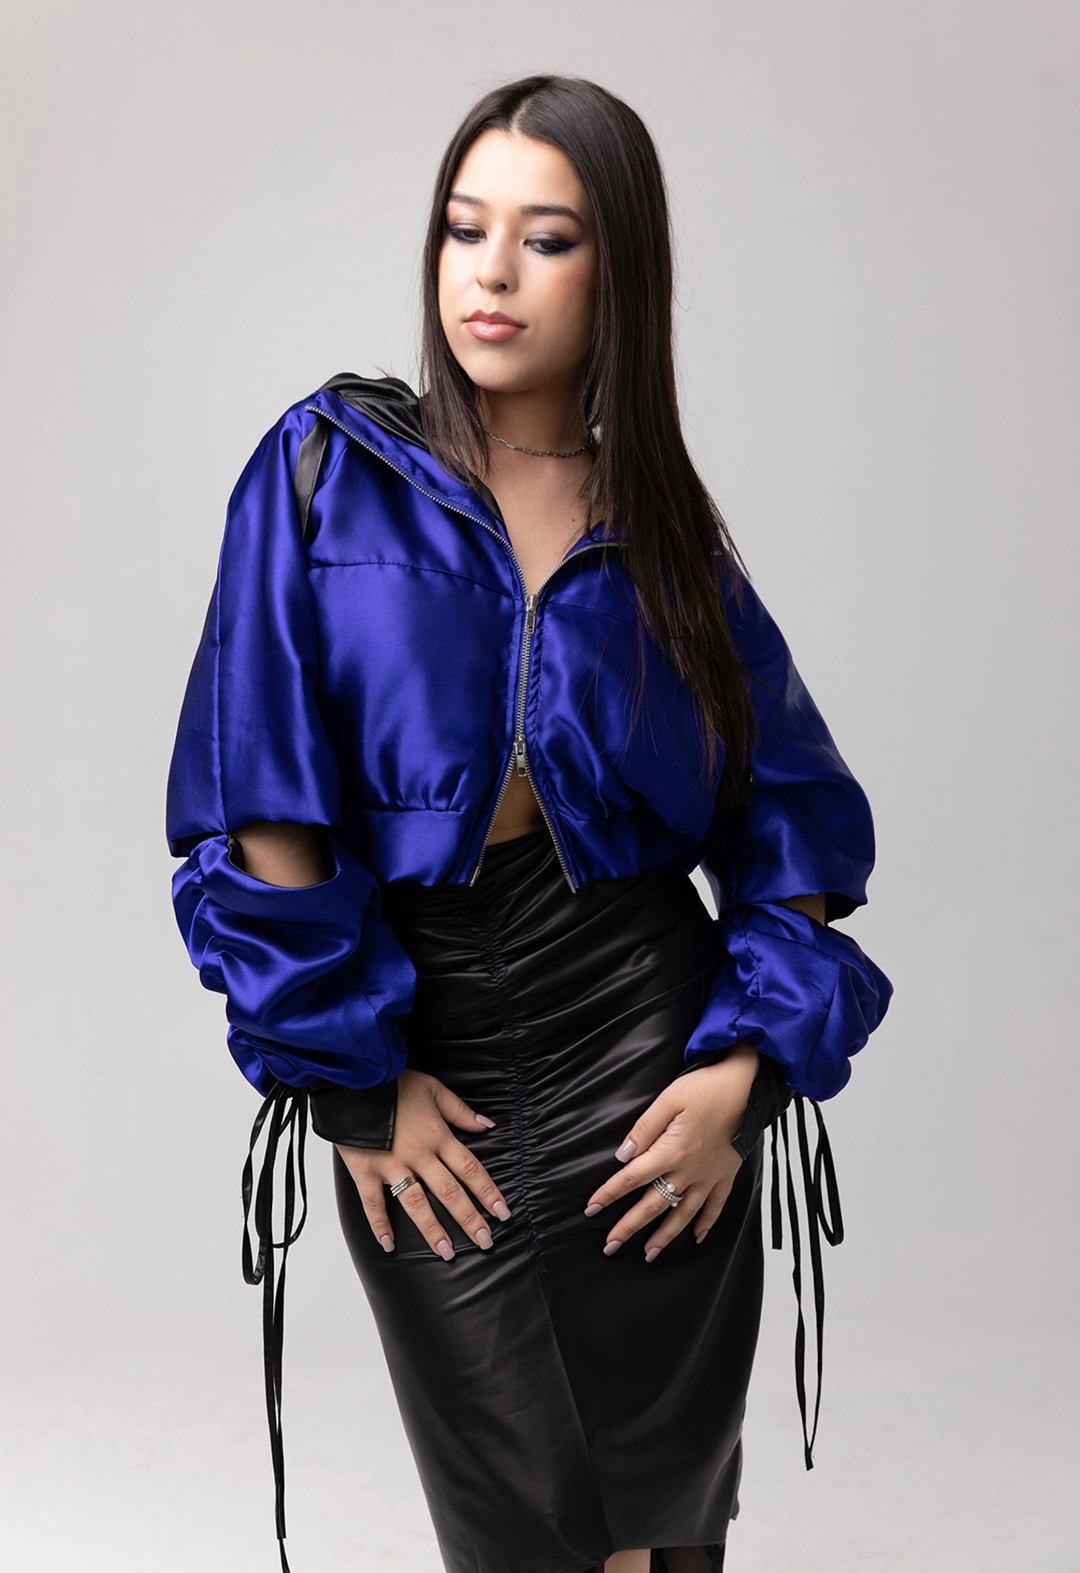 This is the front view of a model wearing a royal blue jacket and a black skirt with gathers on center front. The jacket has cut-outs on the elbow and drawstrings hanging from the cuff. The model has both her hands on her thighs. The background is gray. 